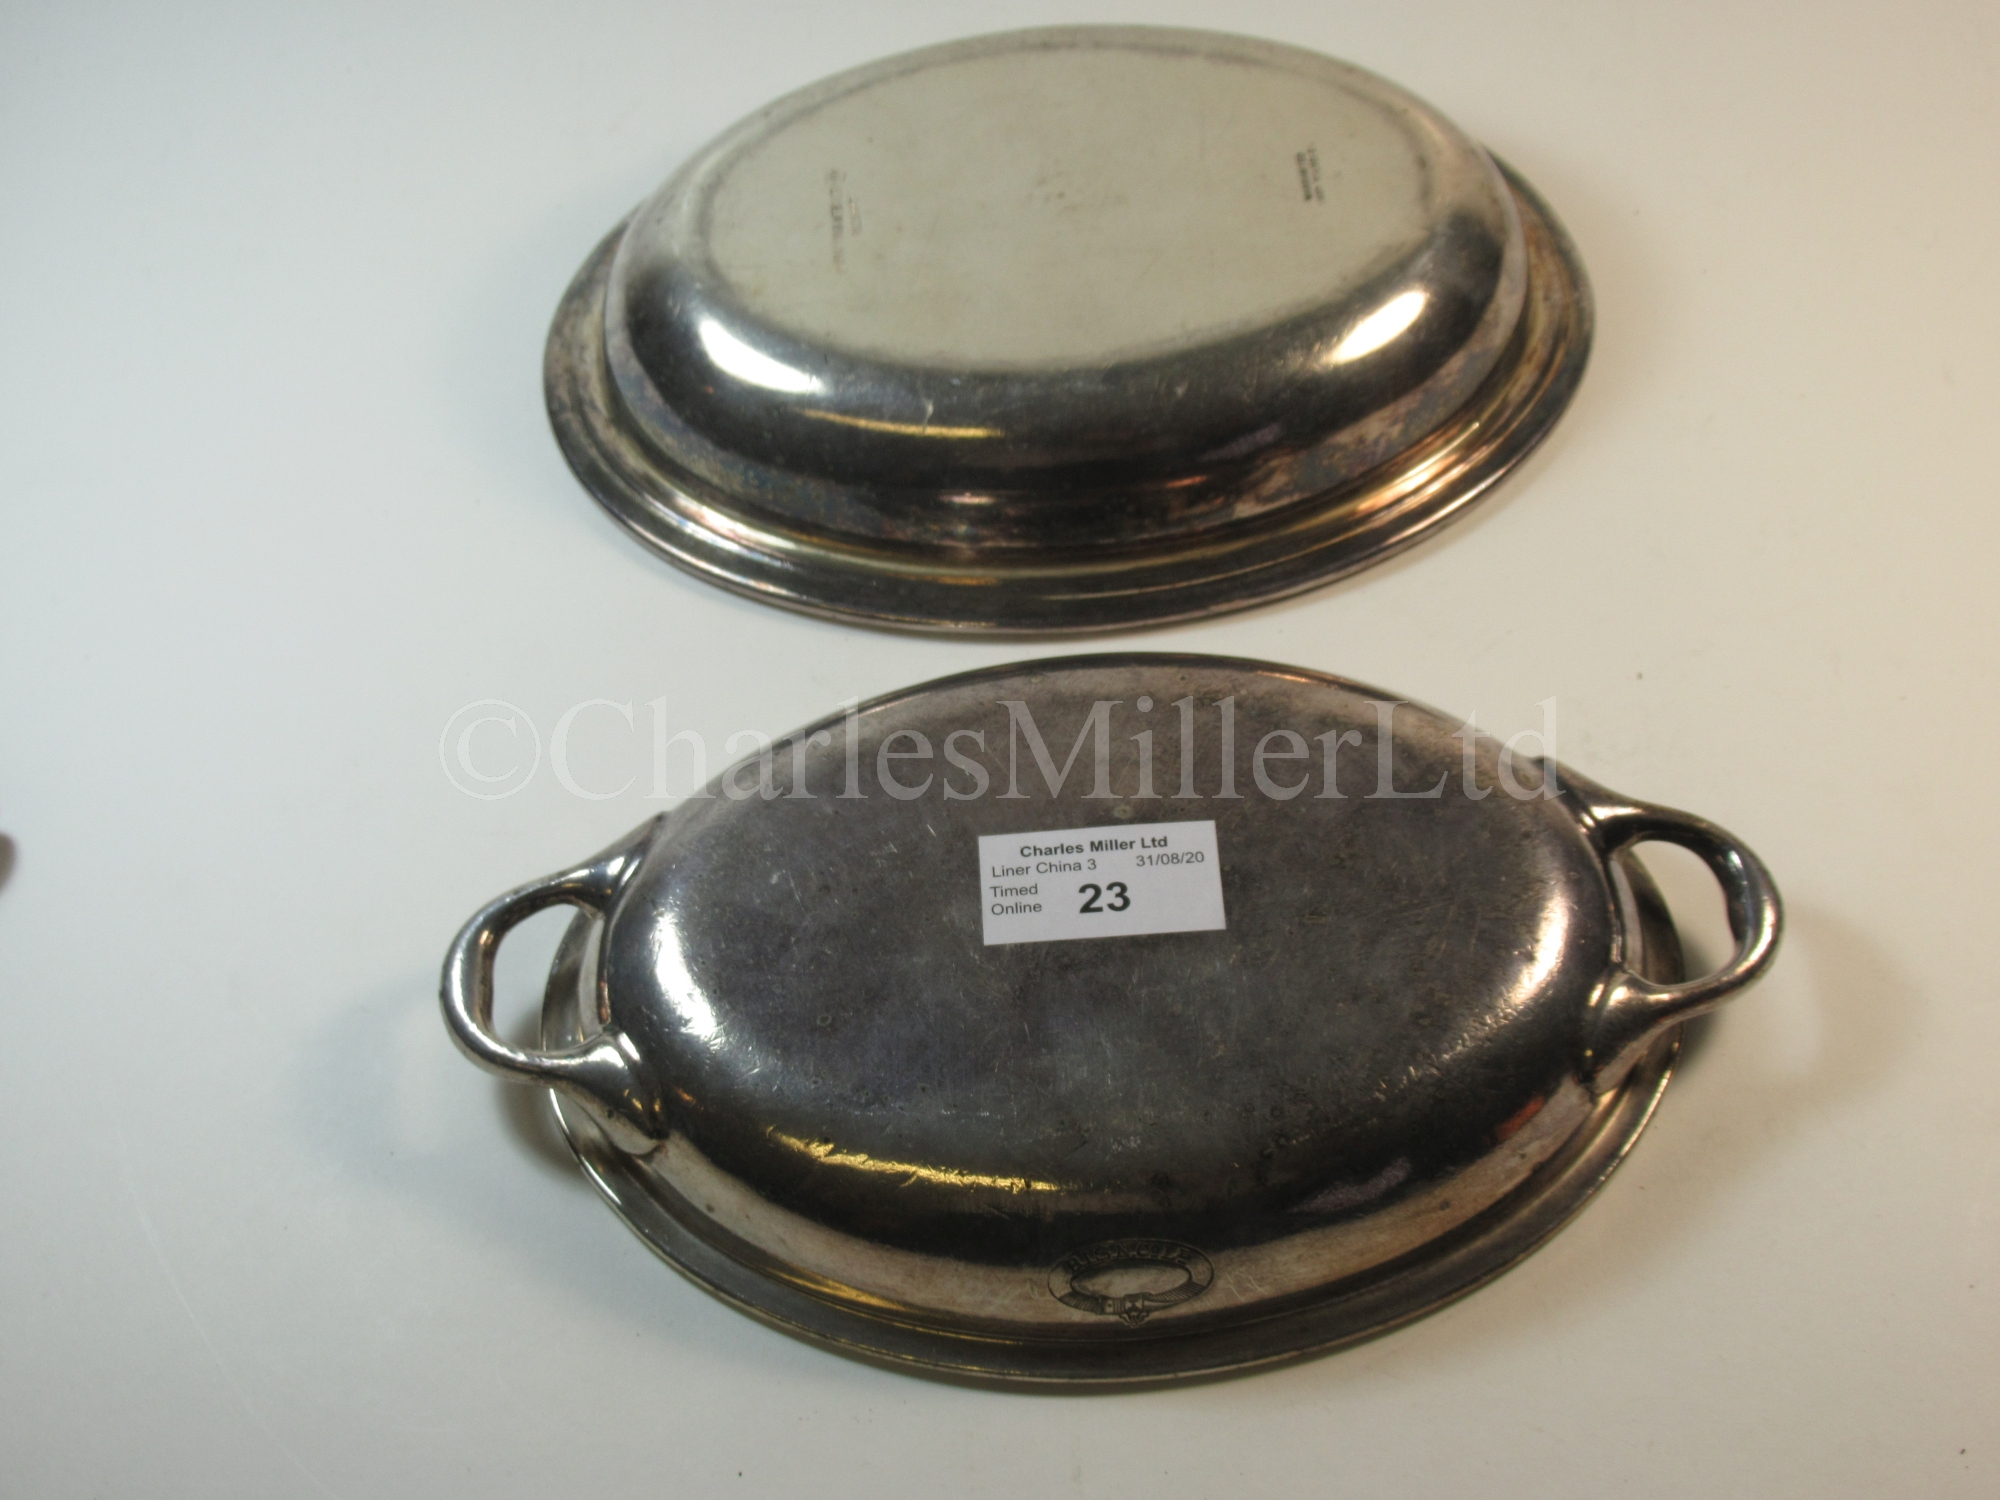 A British India Steam Navigation Company plated tureen and cover - Image 6 of 9